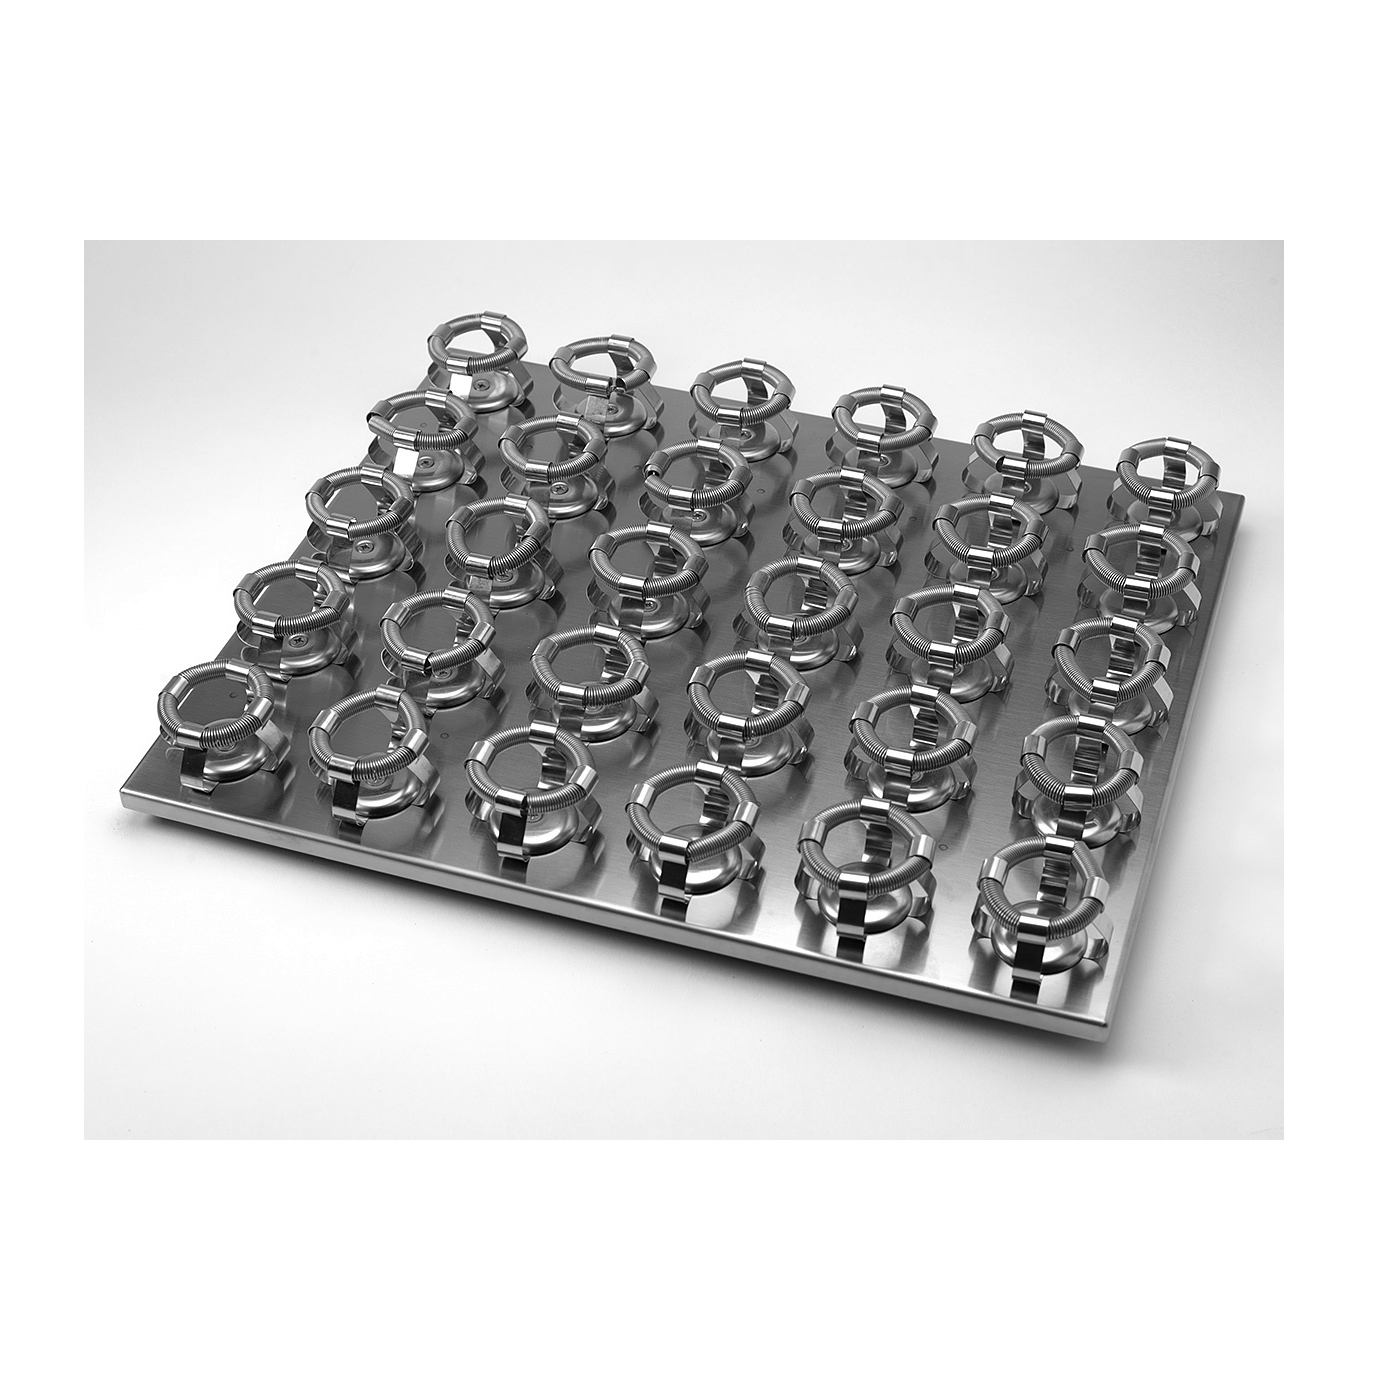 Corning™ Platform with 30 x 50 mL Flask Clamps